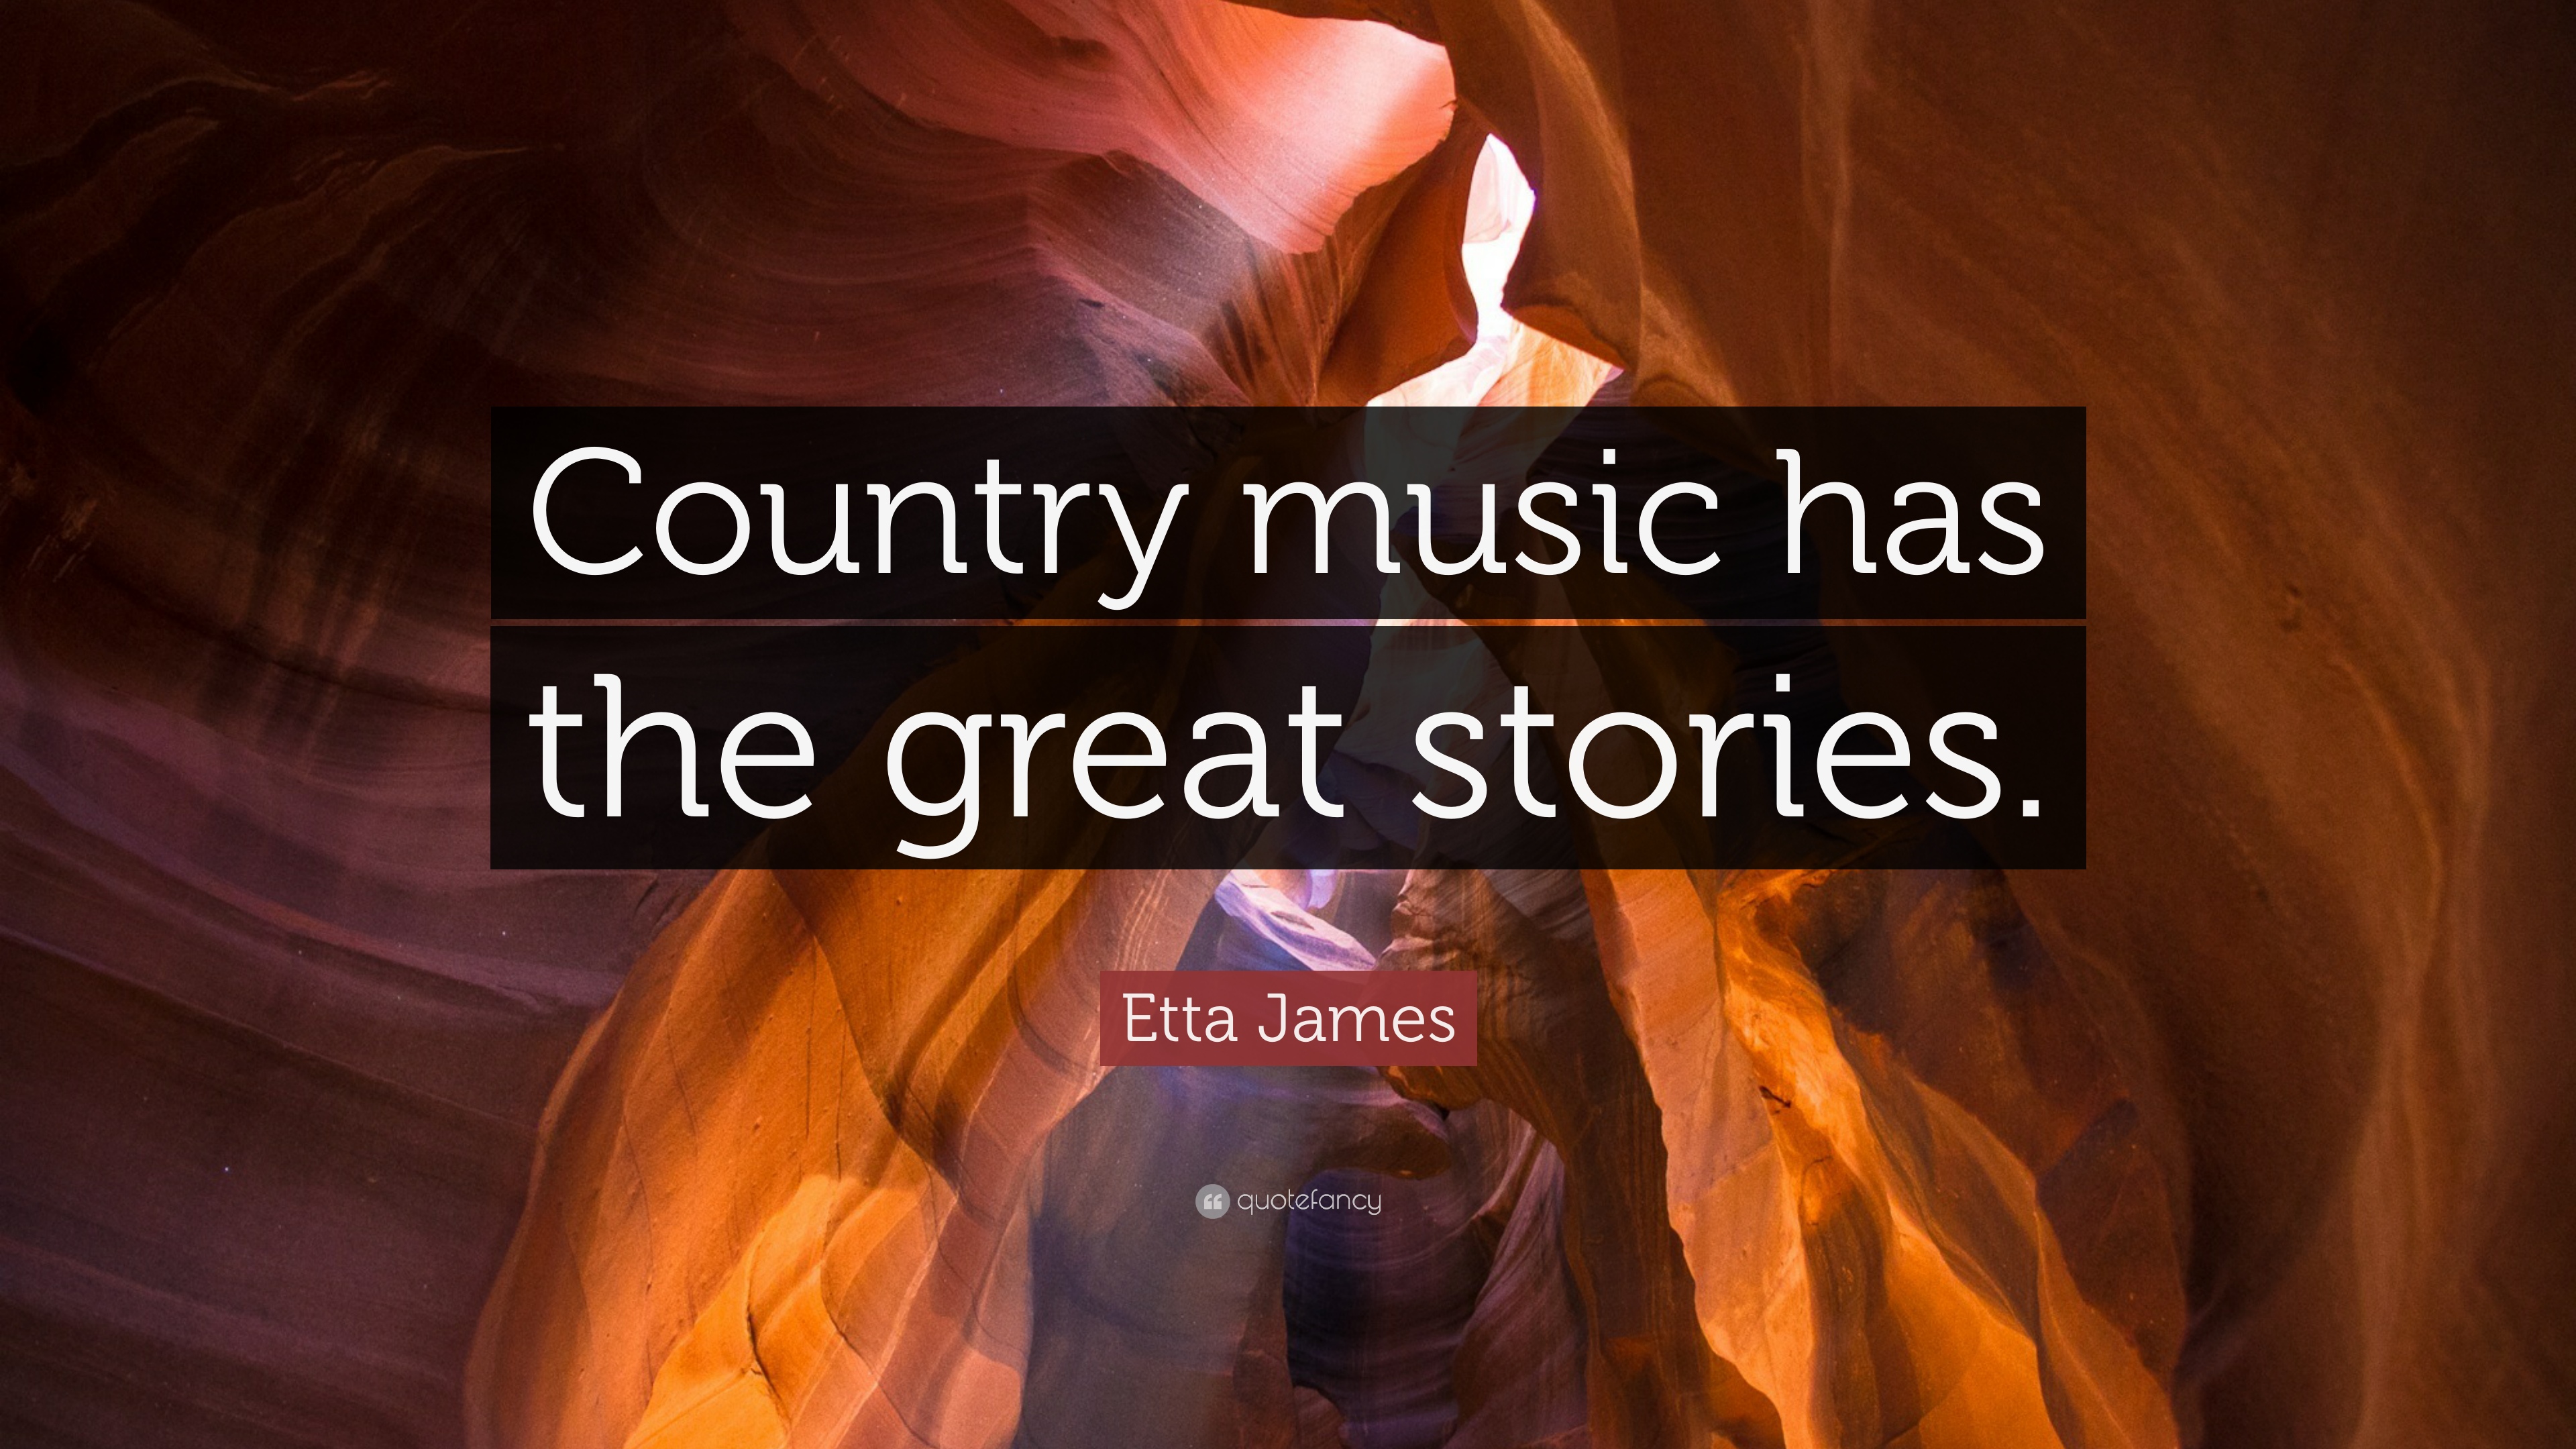 Etta James Quote: “Country music has the great stories.” 7